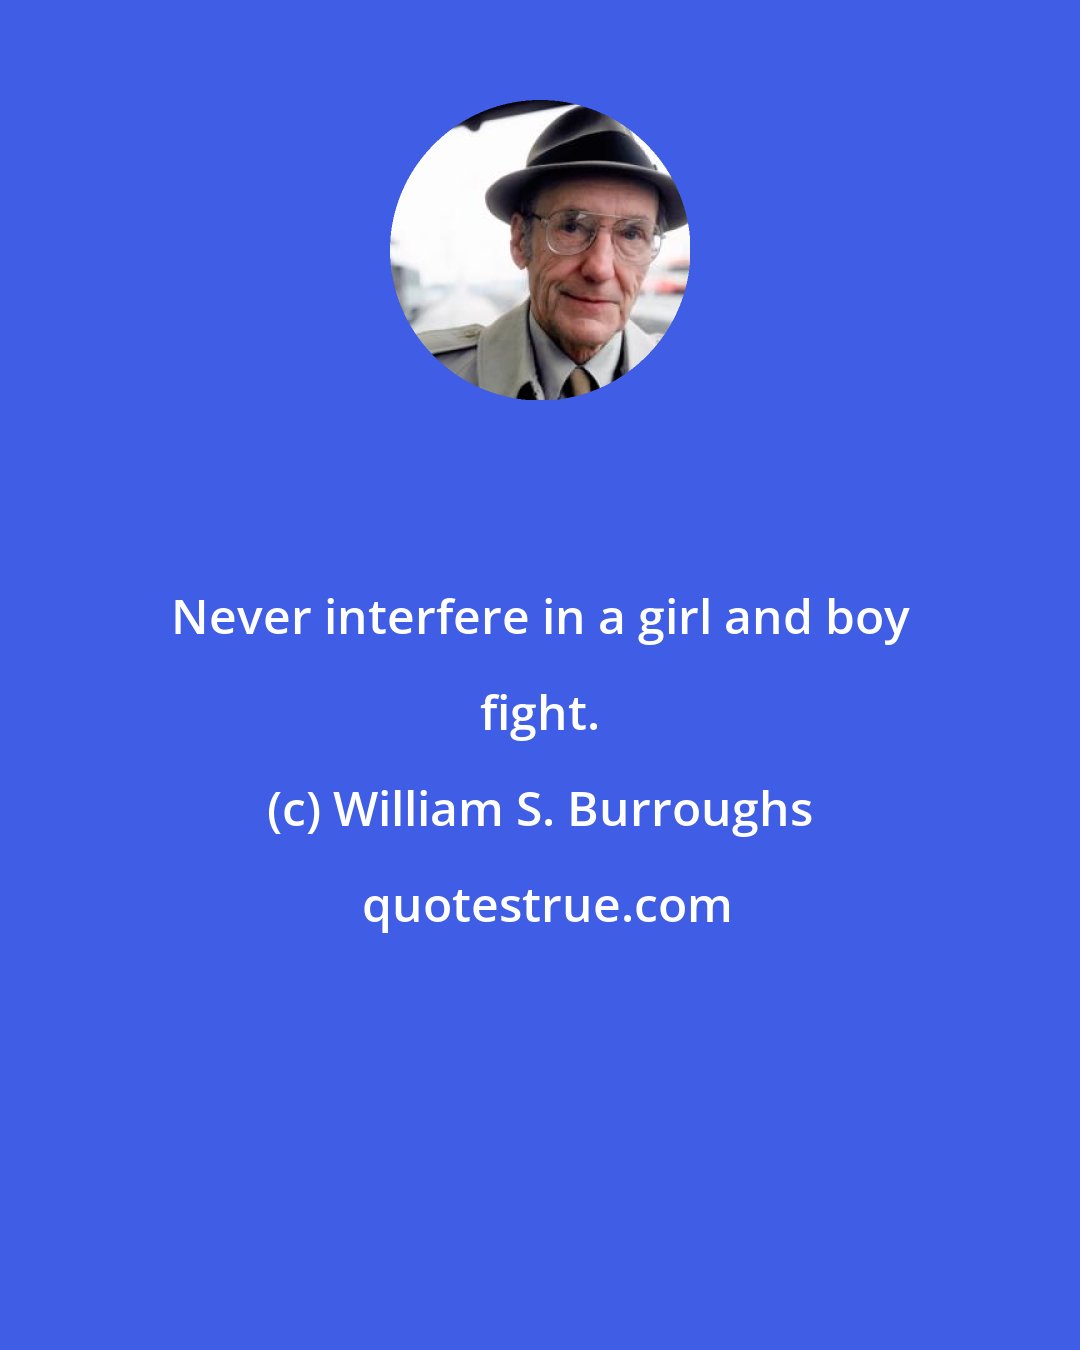 William S. Burroughs: Never interfere in a girl and boy fight.